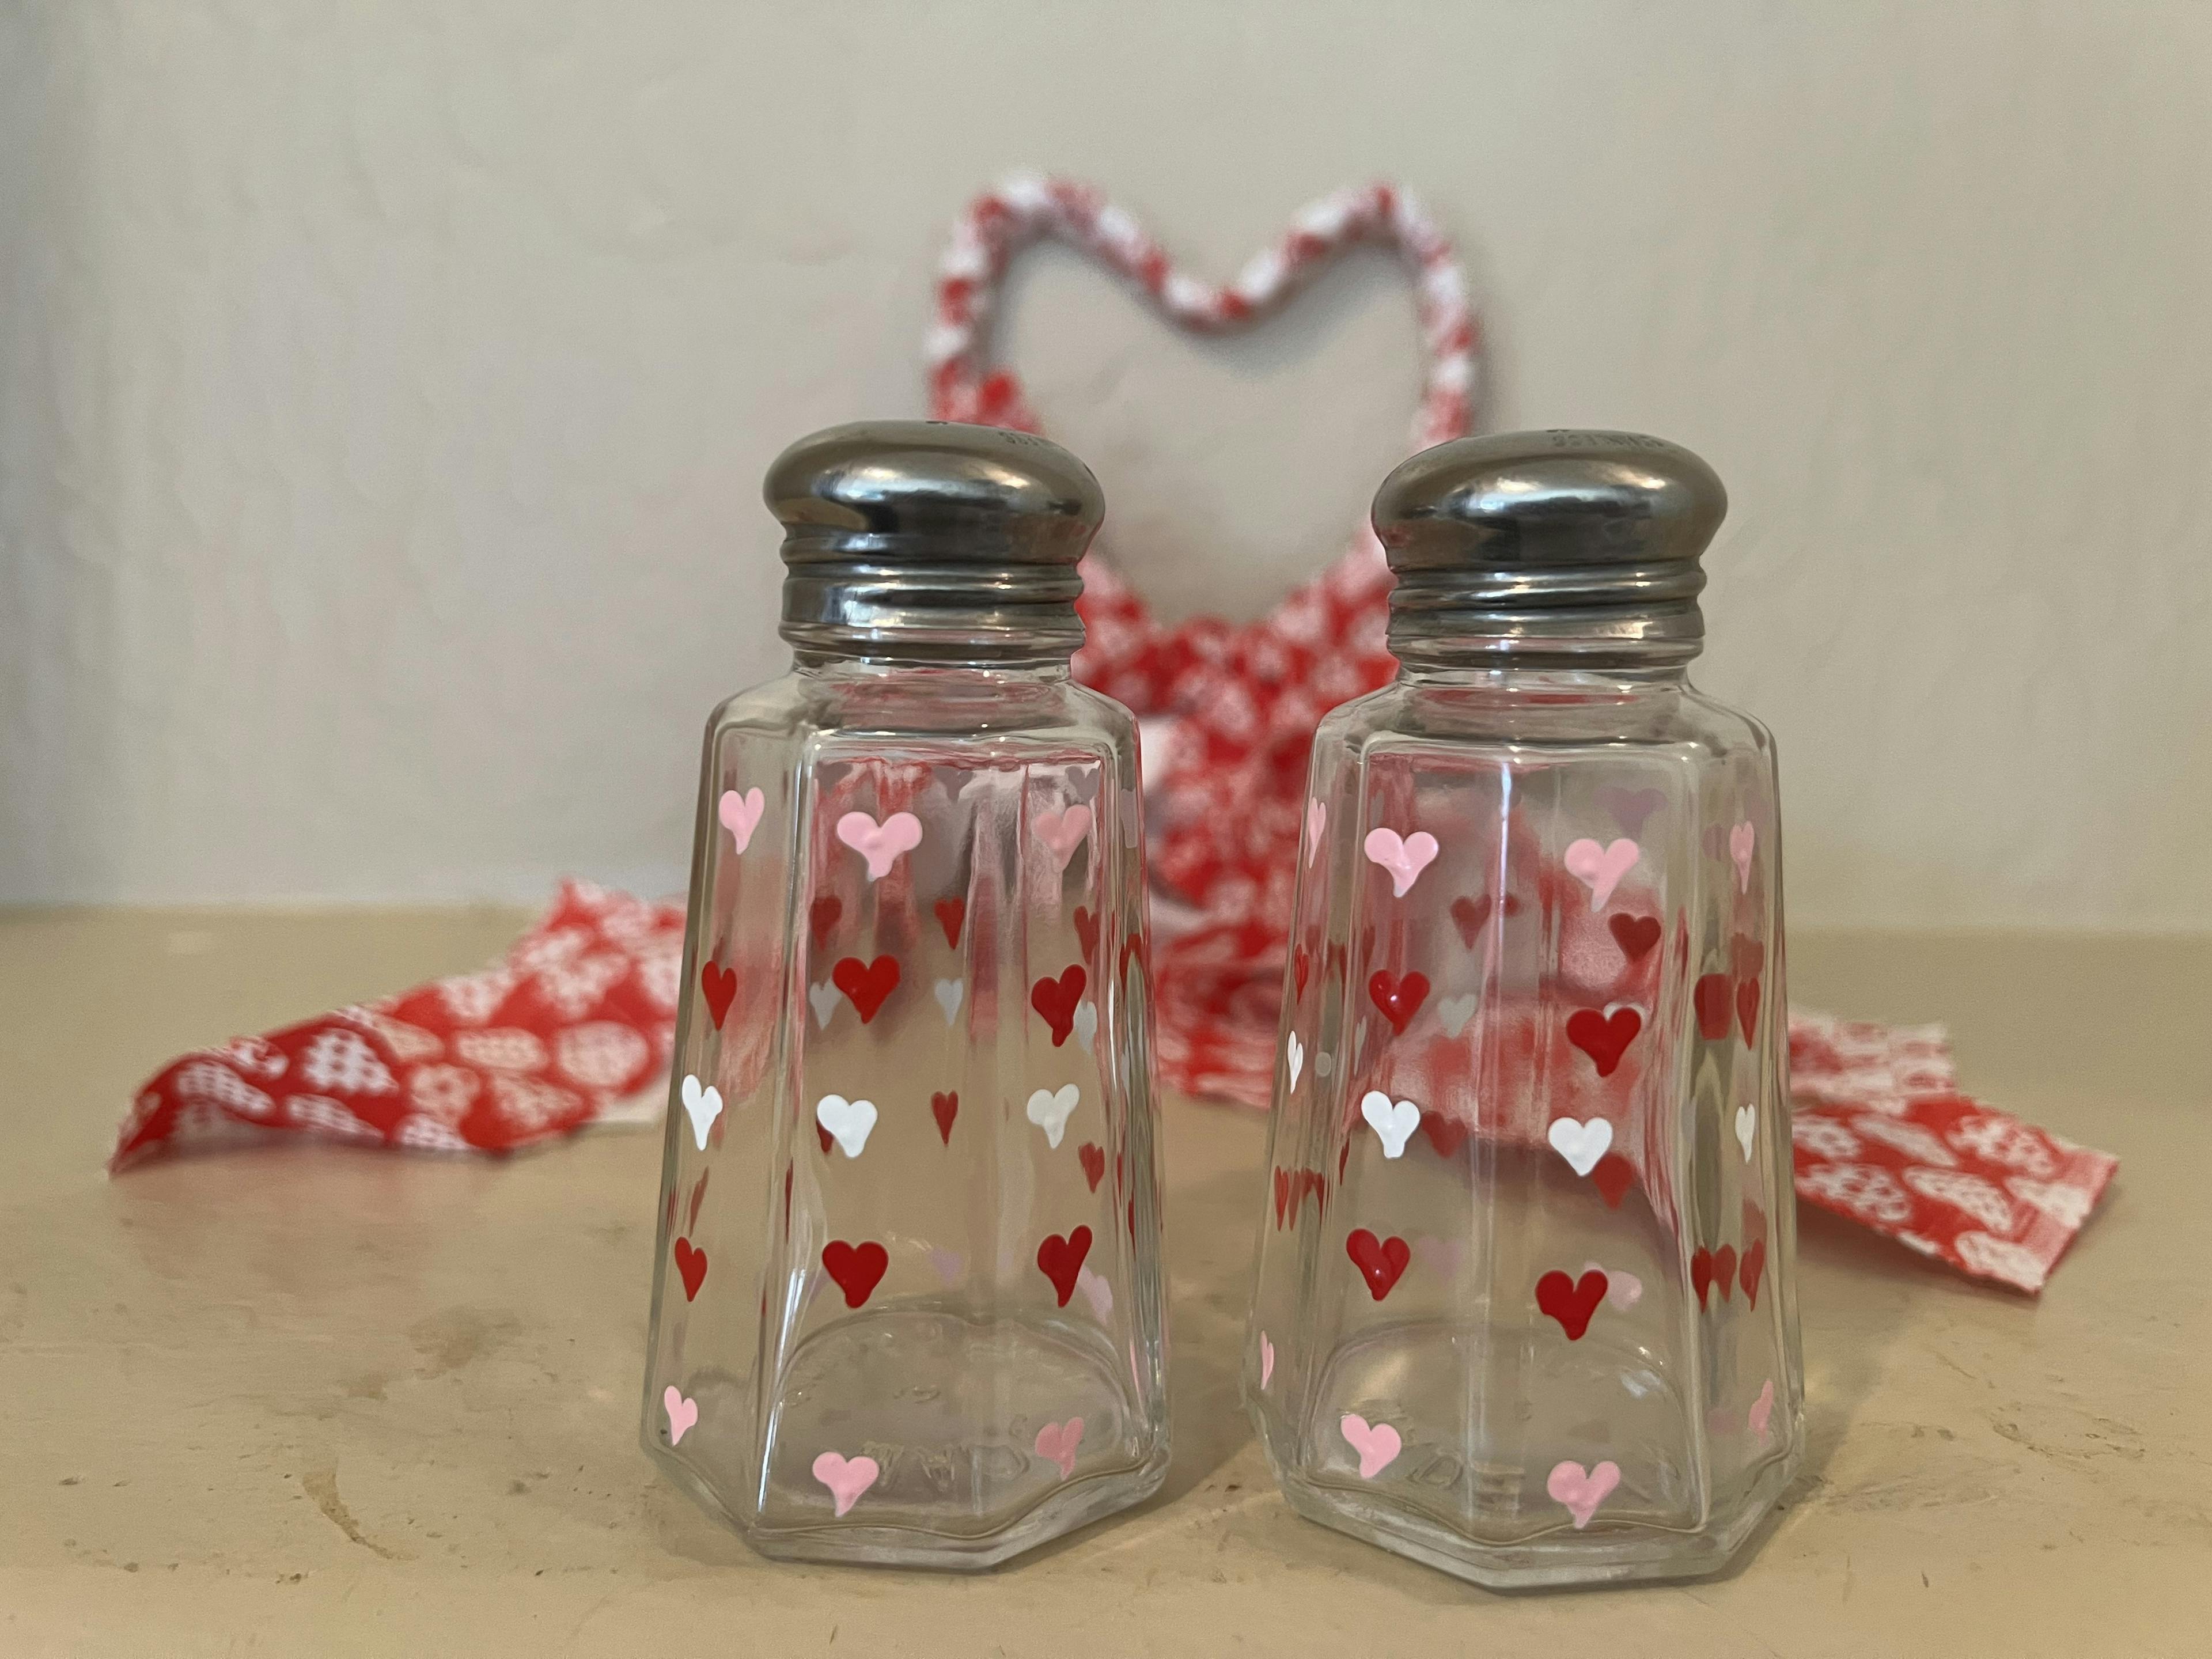 Pink, White and Red Valentine Hearts Hand Painted on 1.25 oz Salt and Pepper Shakers